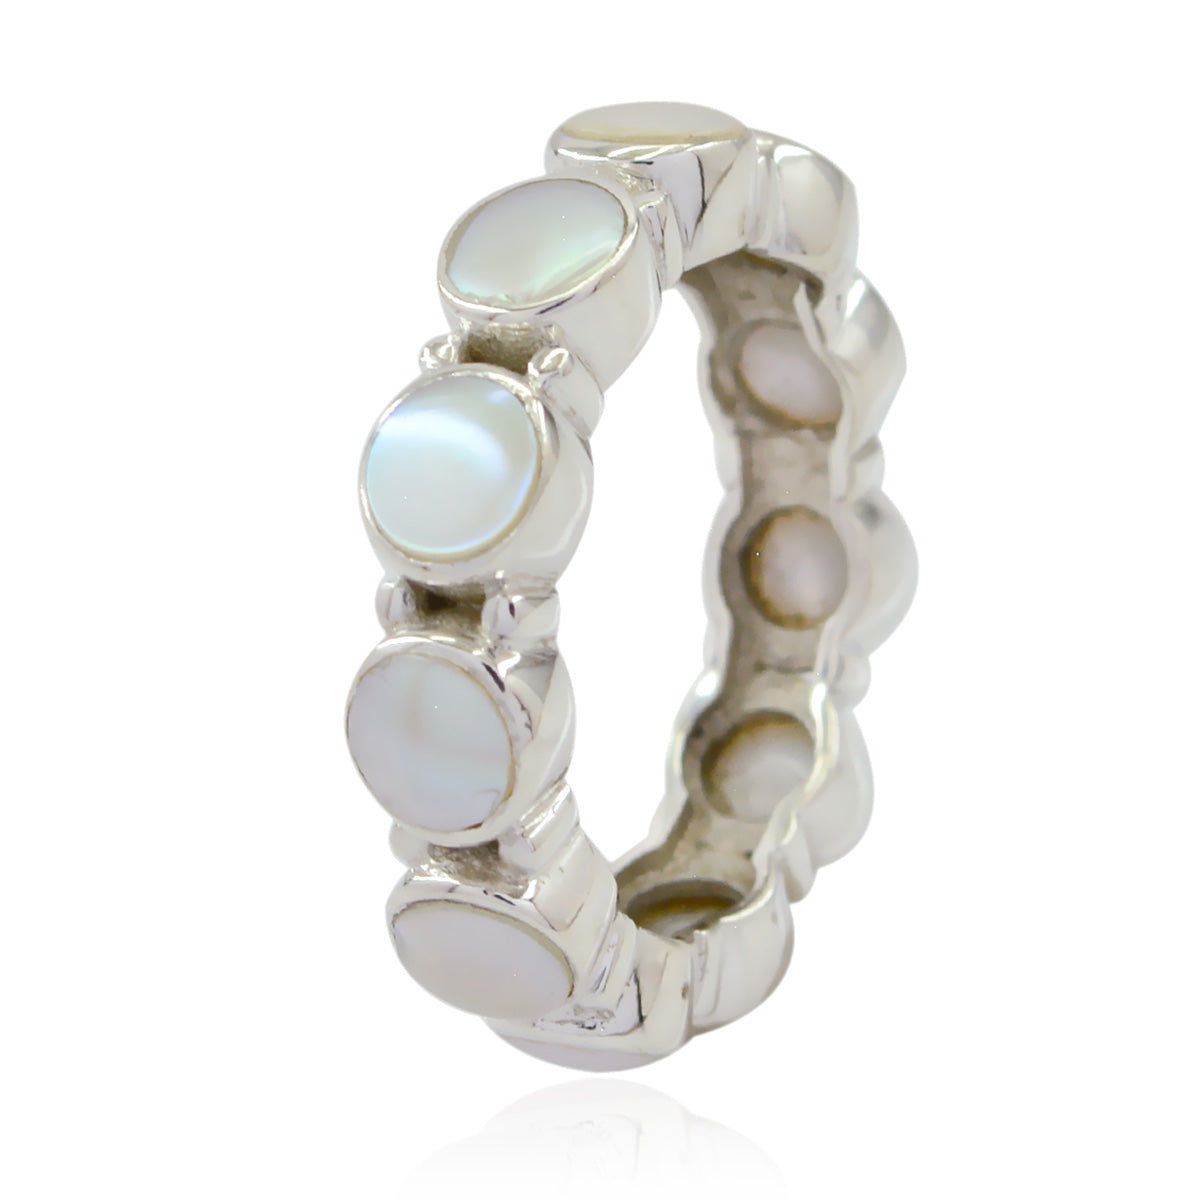 Riyo Cunning Stone Pearl Sterling Silver Rings Remembrance Jewelry